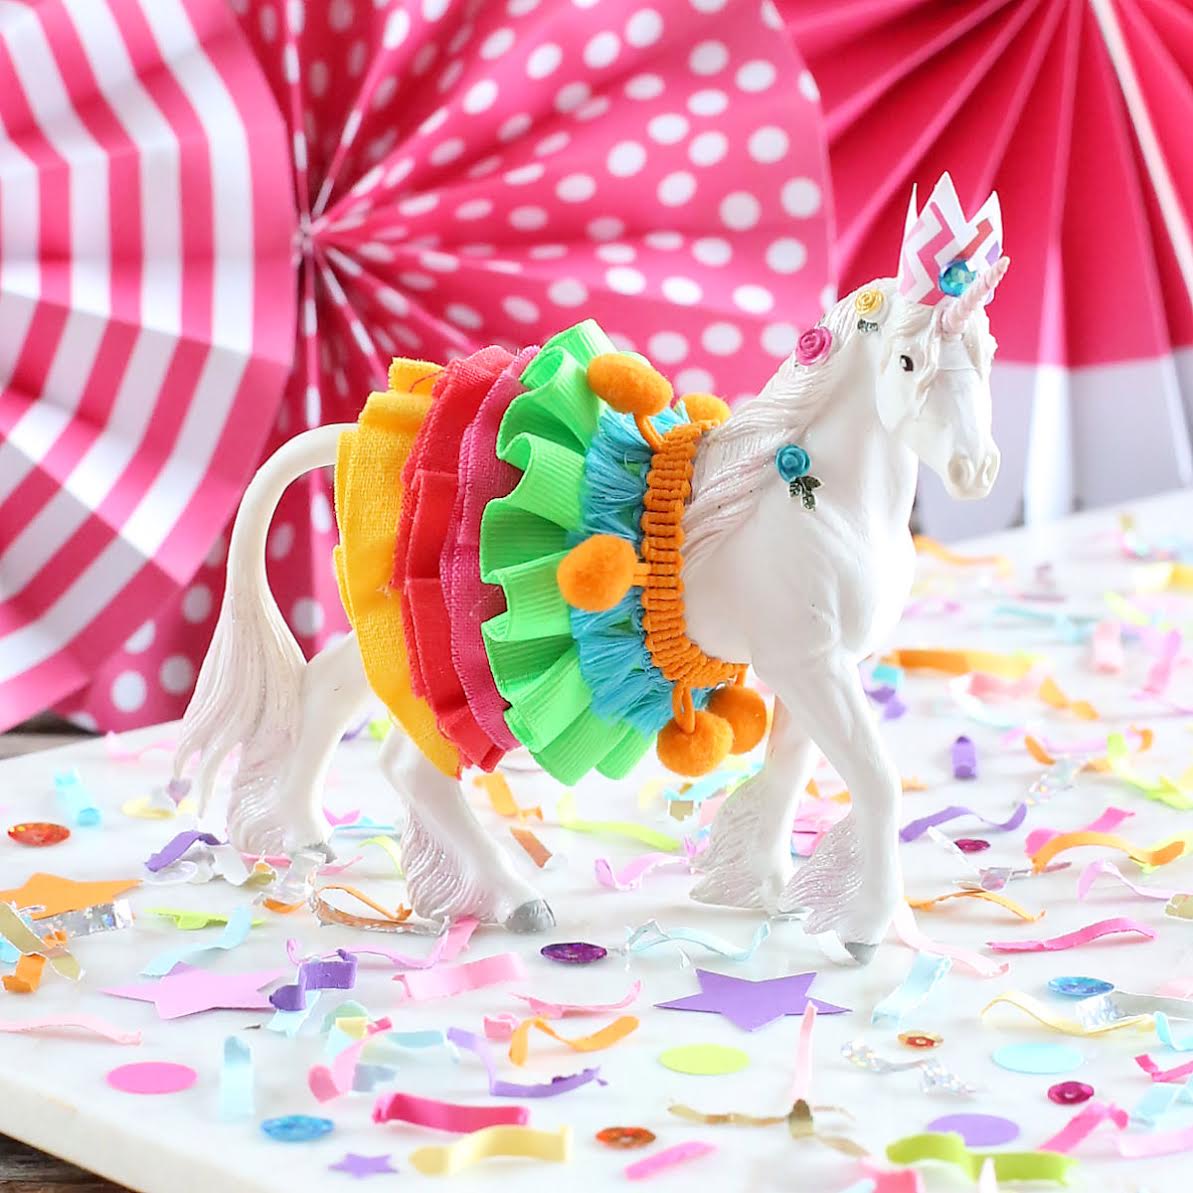  Colorful Unicorn Must-Have Party Items for a Perfectly Styled Unicorn Theme Dessert Table - a sweet Unicorn Animal Cake Topper and Festive Fetti Confetti - from The Bakers Party Shop - see more on www.GiggleHearts.com 